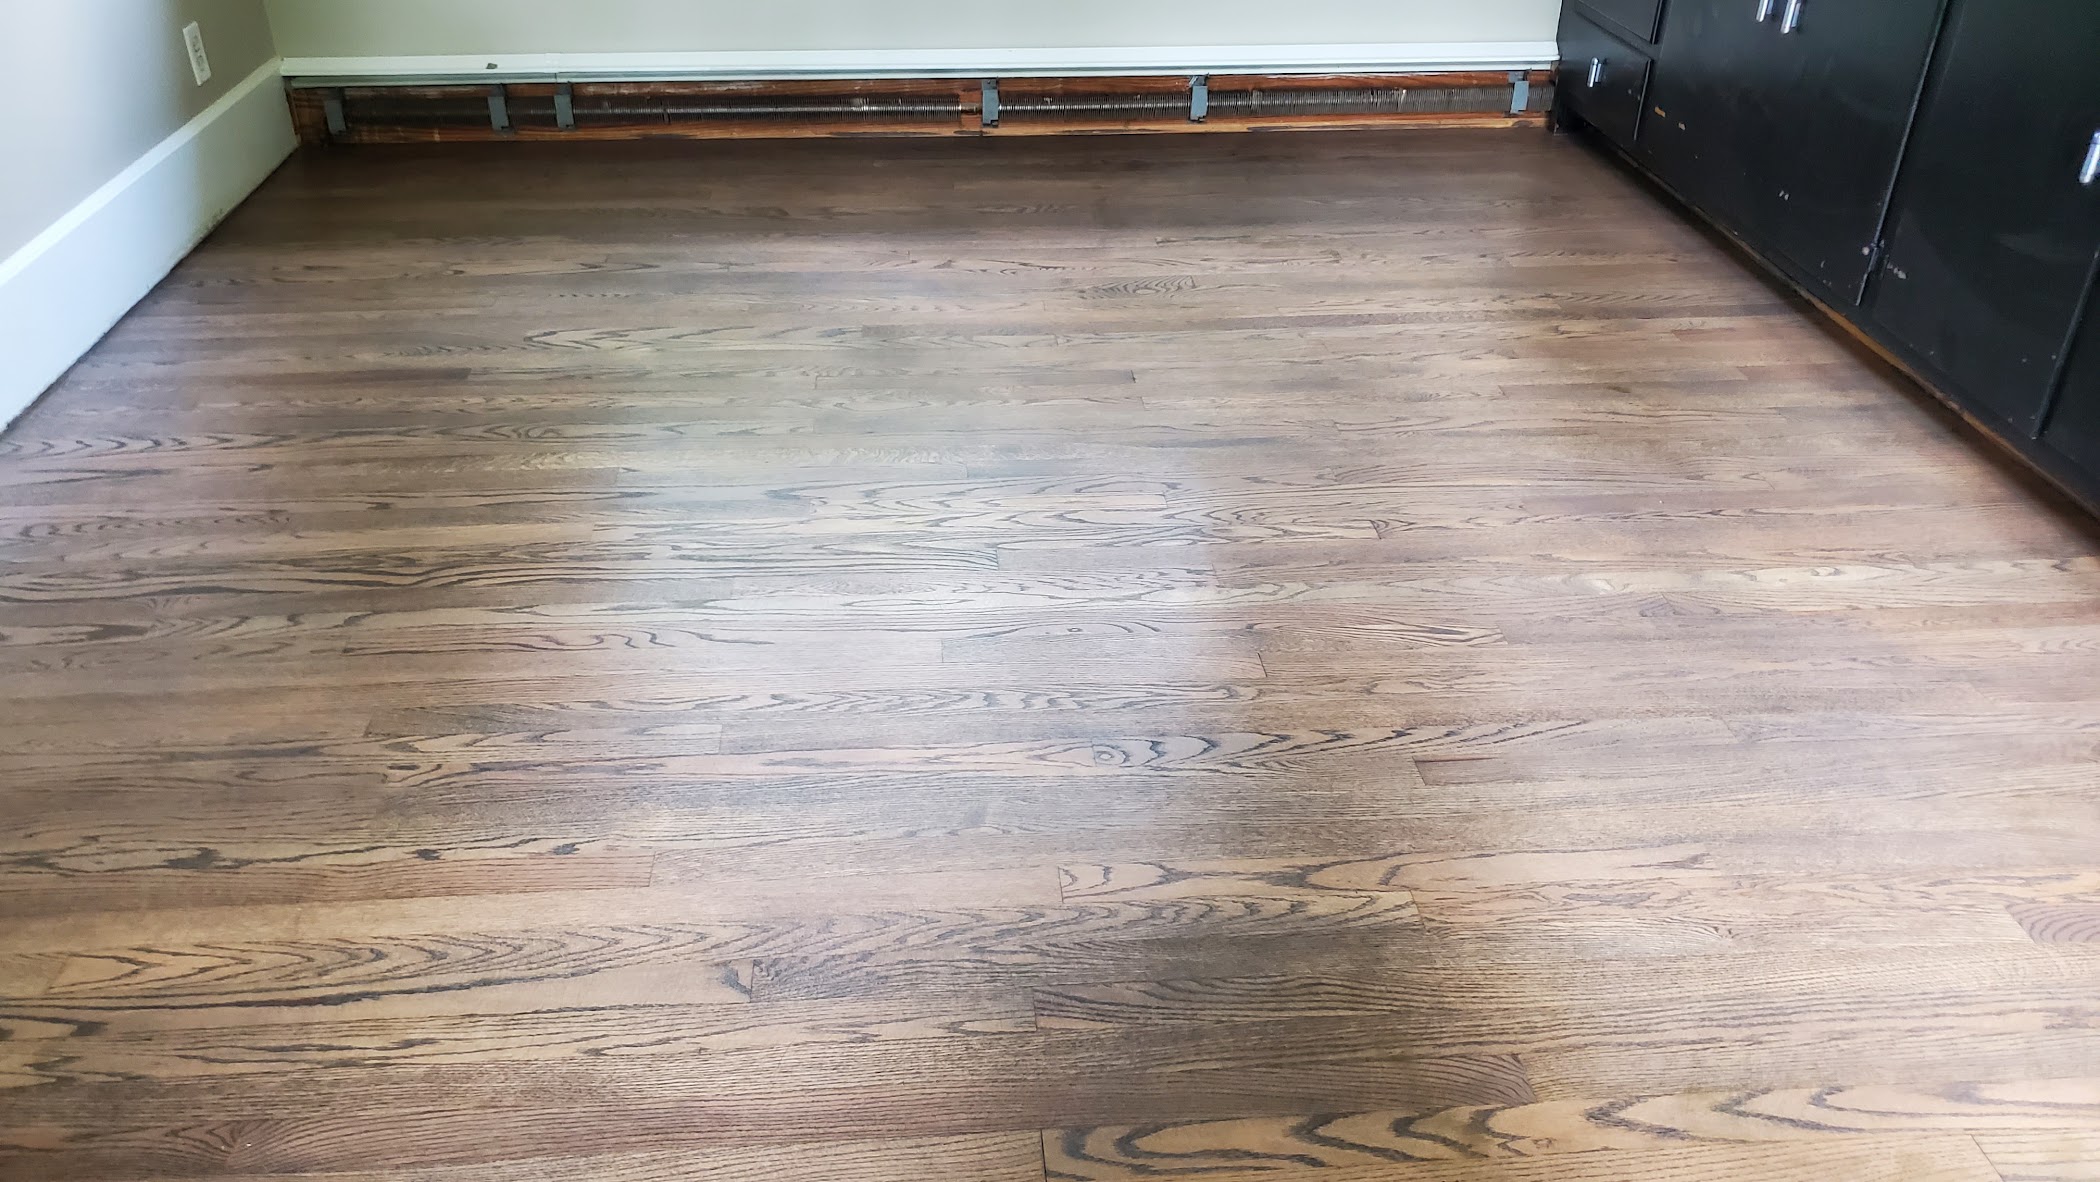 Yardley dining room floor fixed and refinished